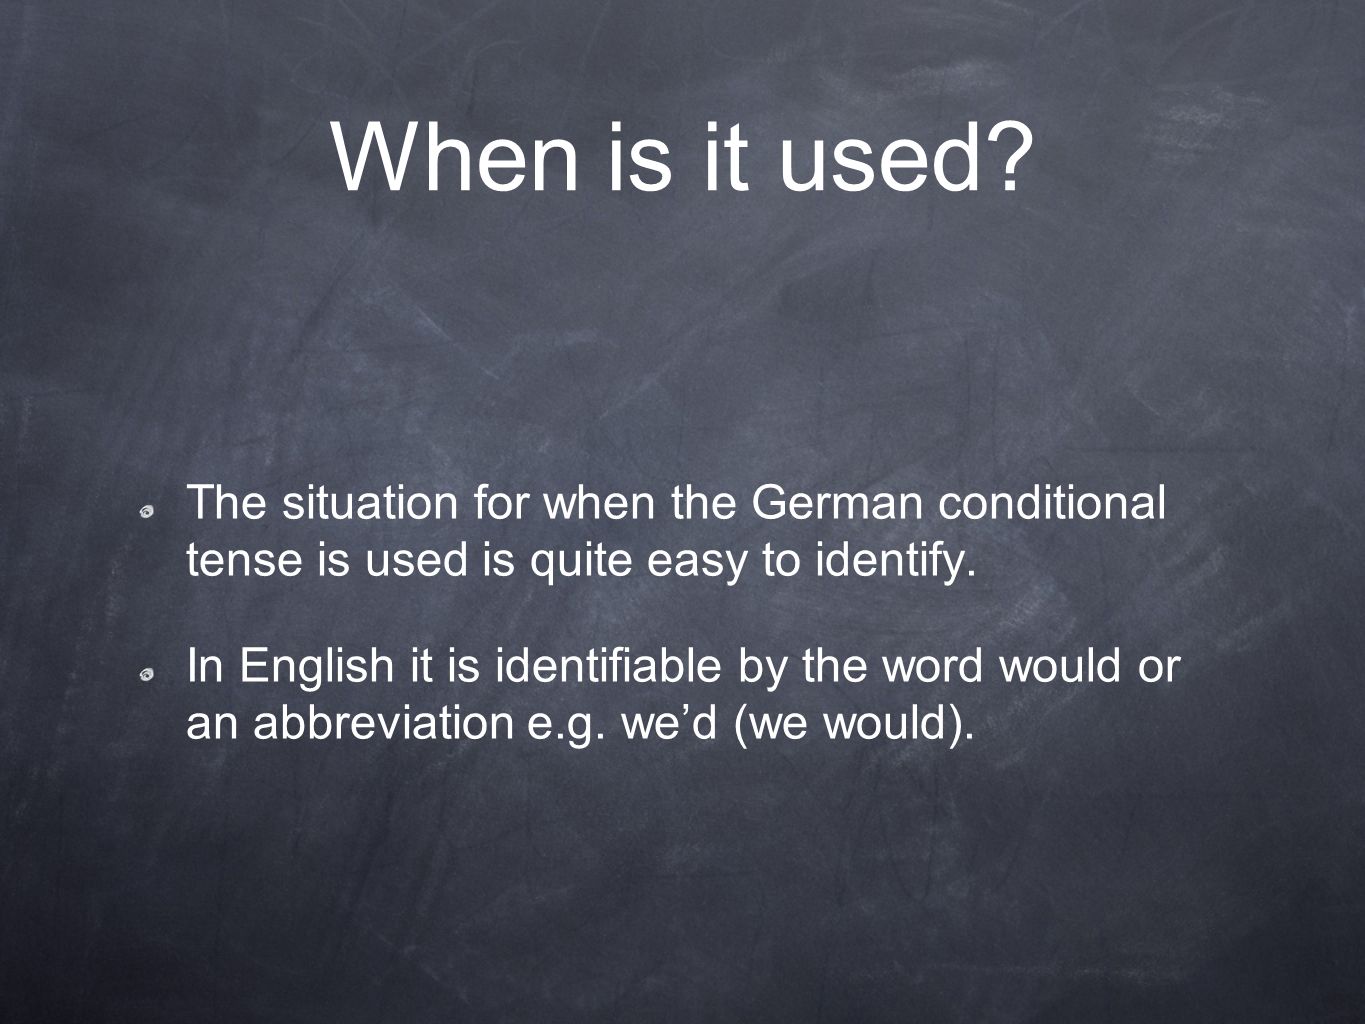 When is it used The situation for when the German conditional tense is used is quite easy to identify.